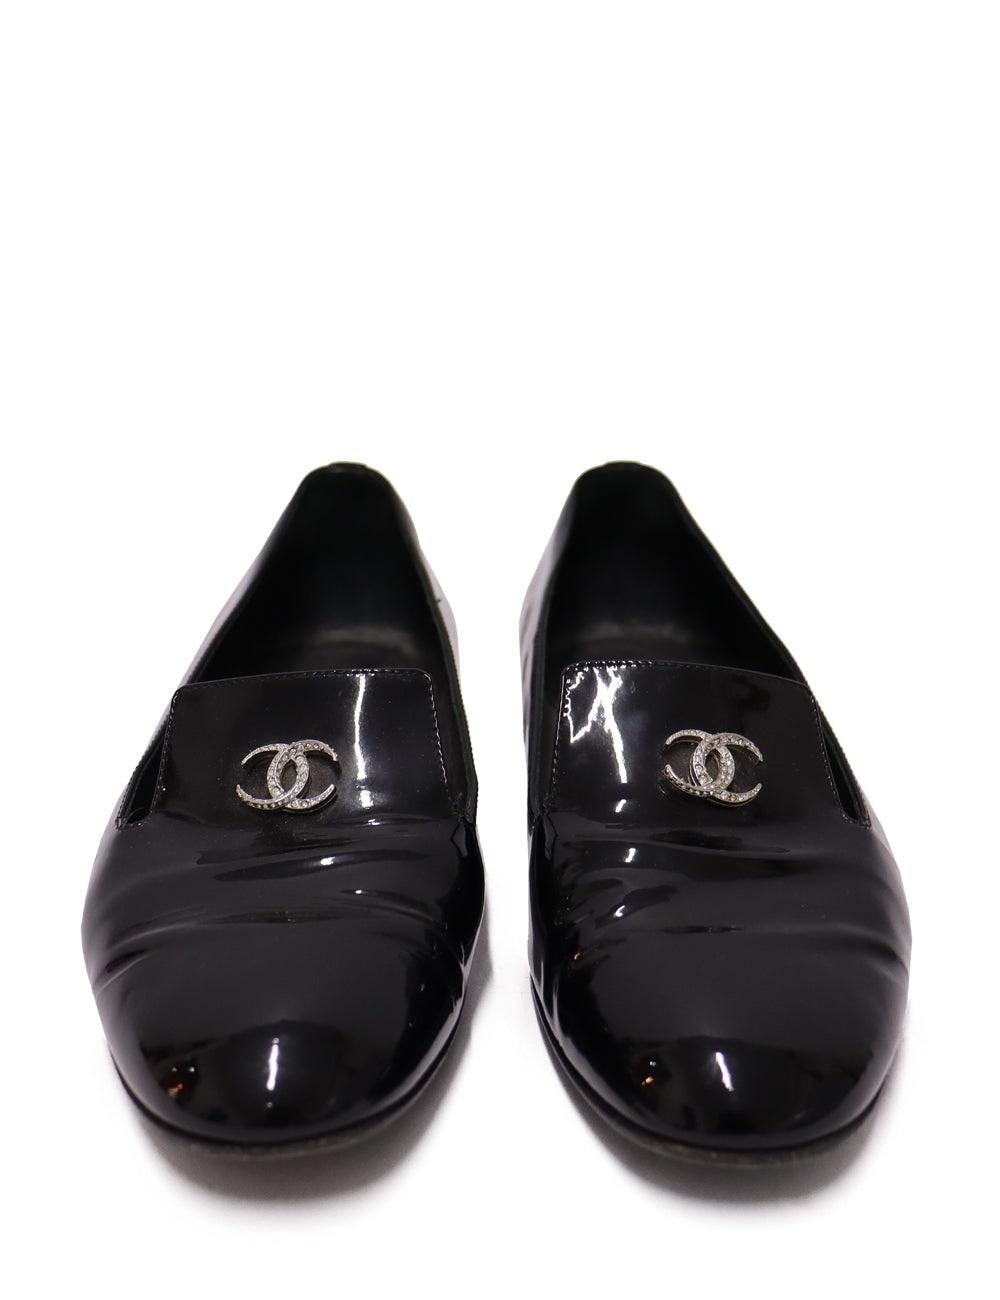 Chanel Black Patent Leather Loafers with a CC Front Crystal Logo.

Additional information:
Material: Leather
Size: EU 37
Measurments: Heel: 1 cm 
Overall Condition: Very Good
Interior Condition: Signs of use
Exterior Condition: Light stains on the